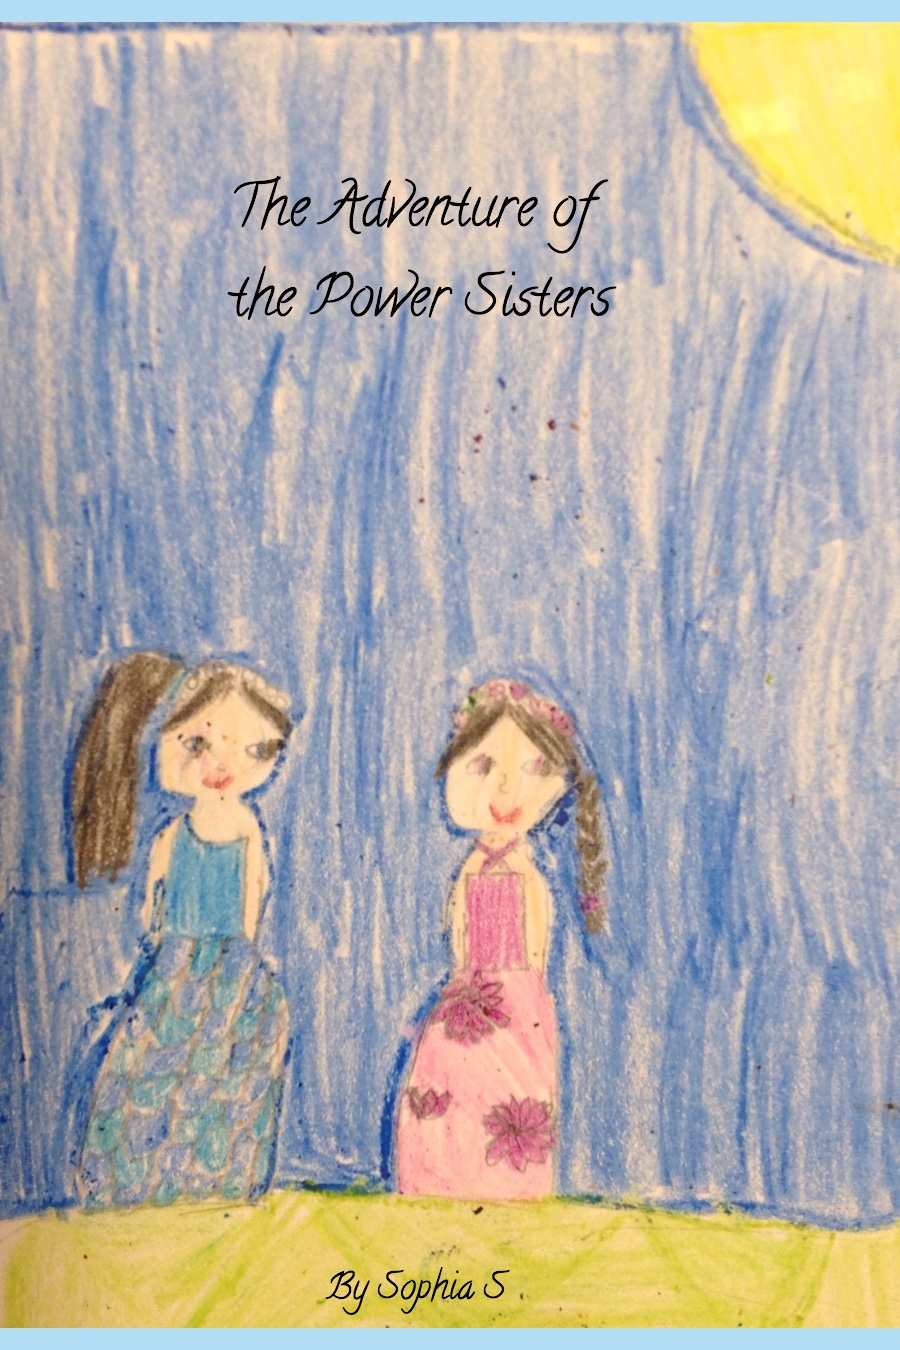 The Adventure of the Power Sisters by Sophia S